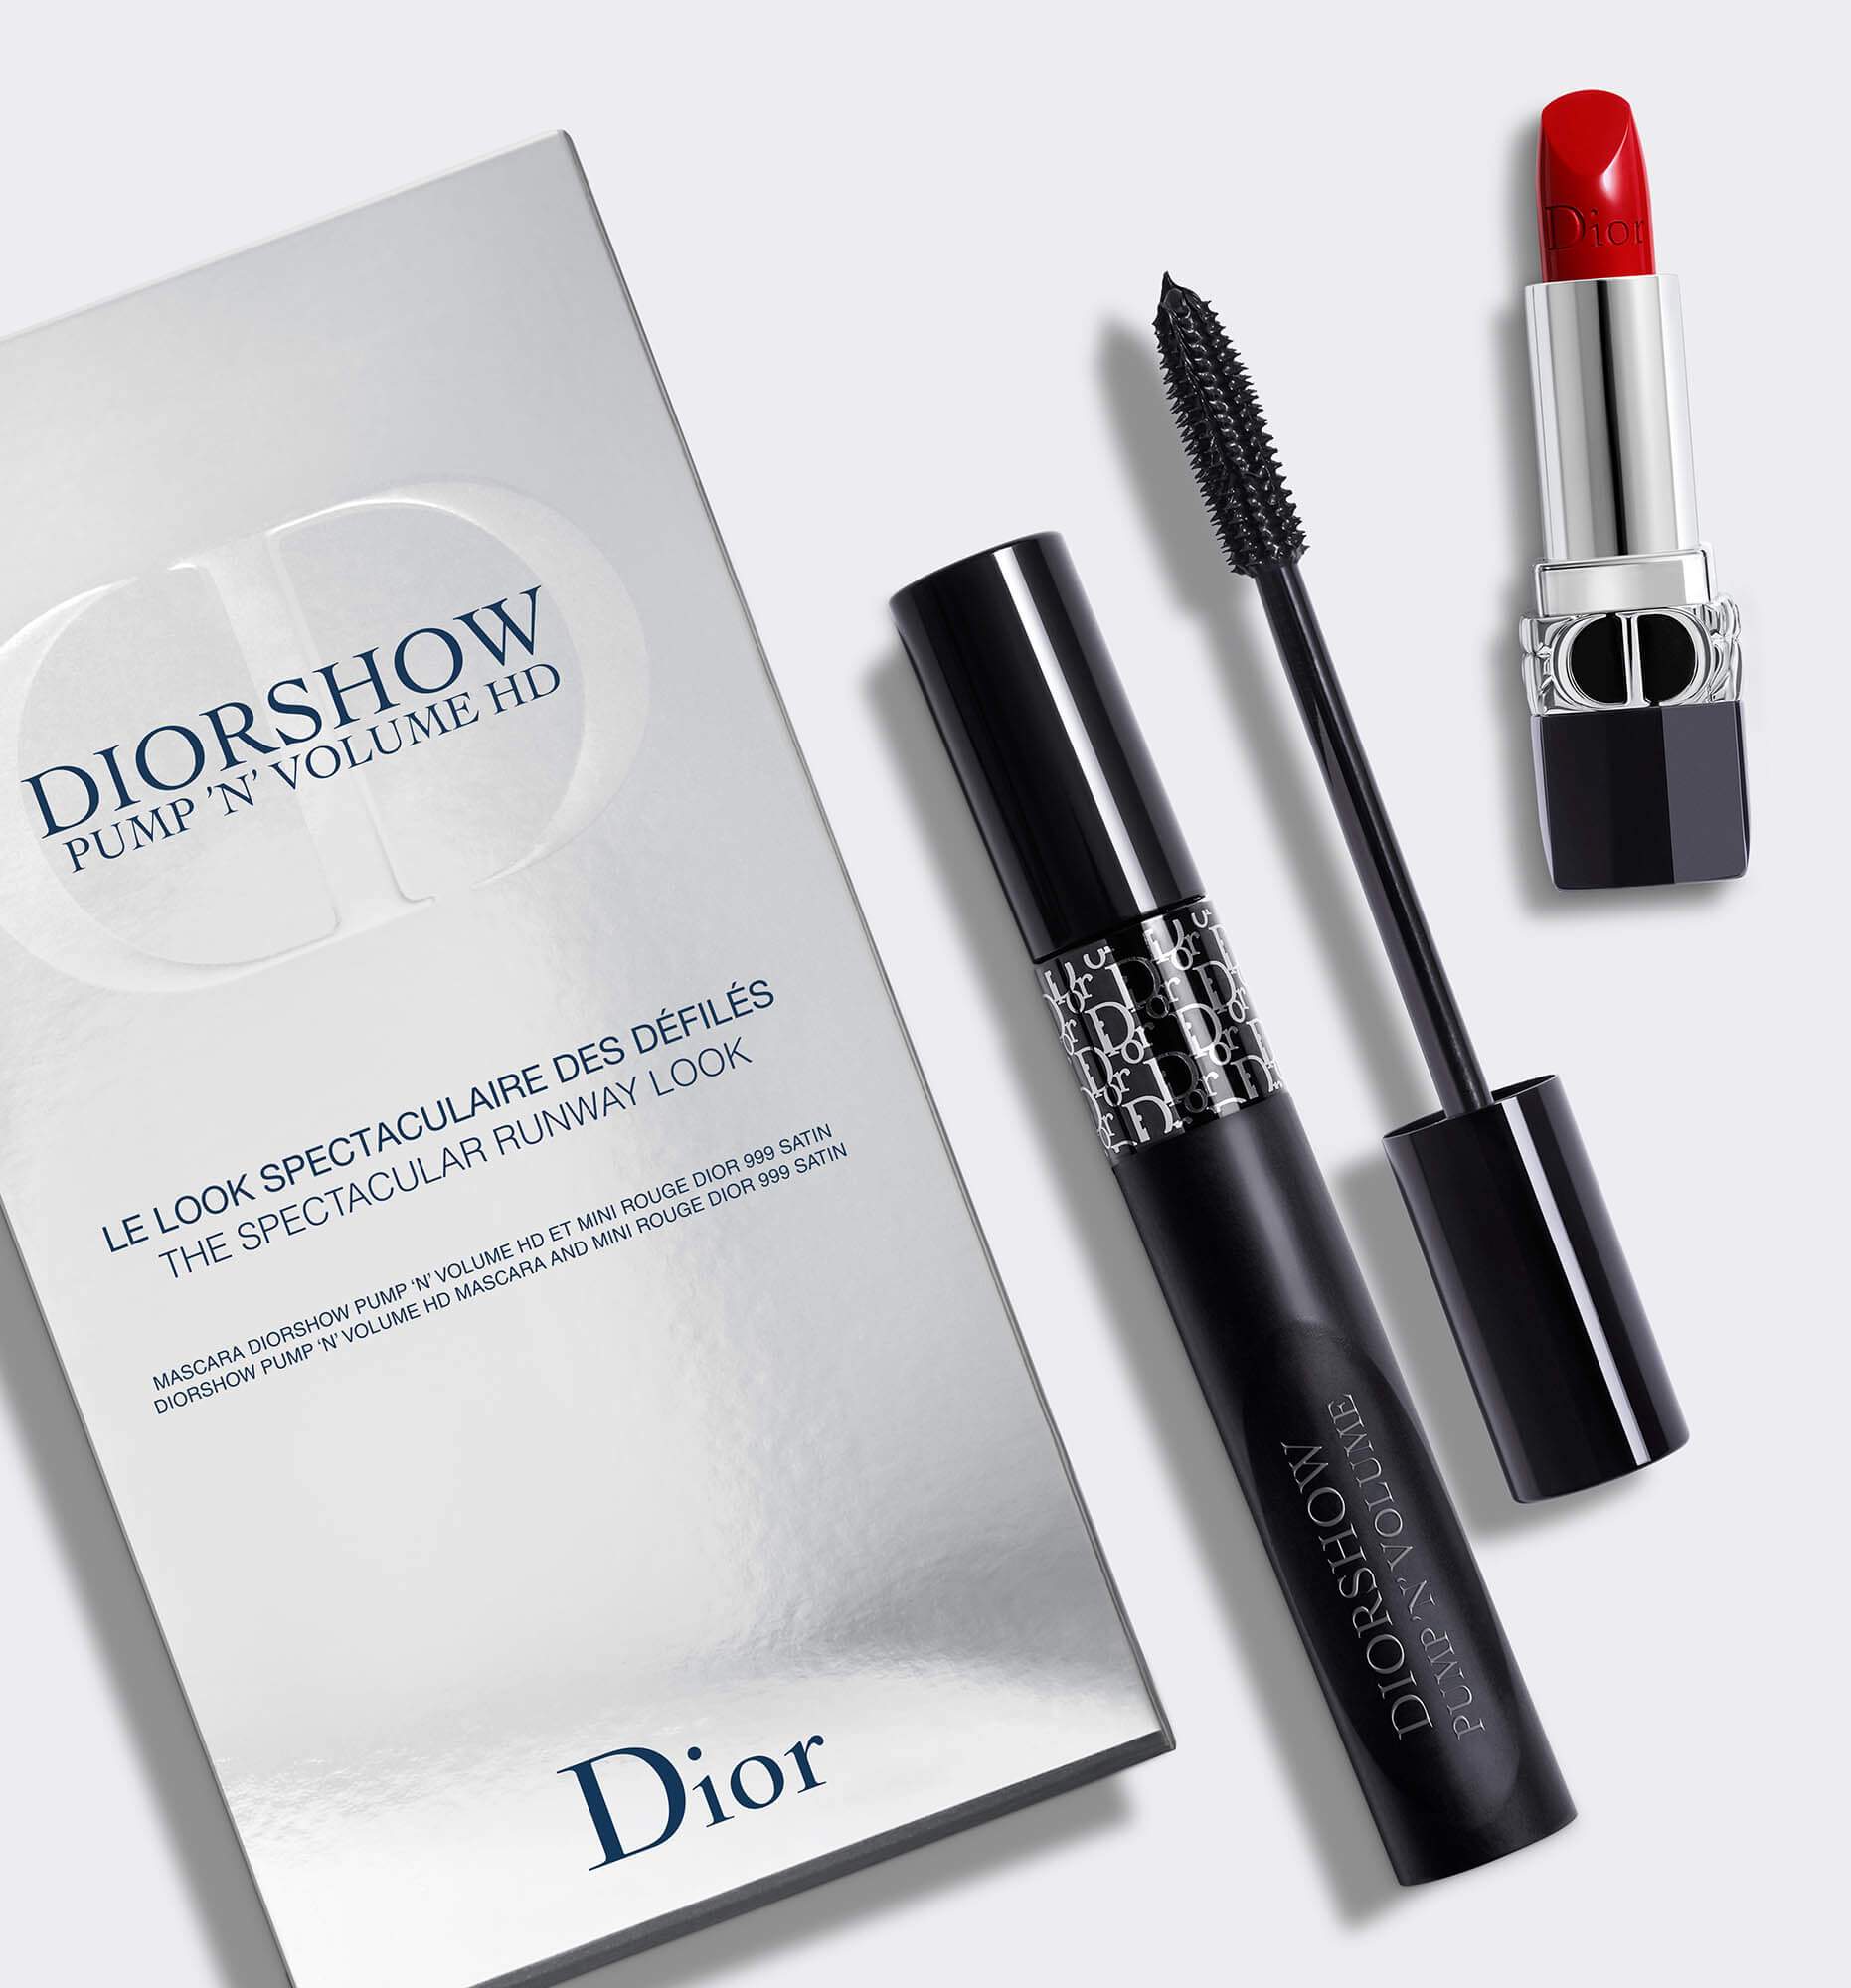 DIORSHOW PUMP N VOLUME MASCARA ON STAGE LINERREVIEW